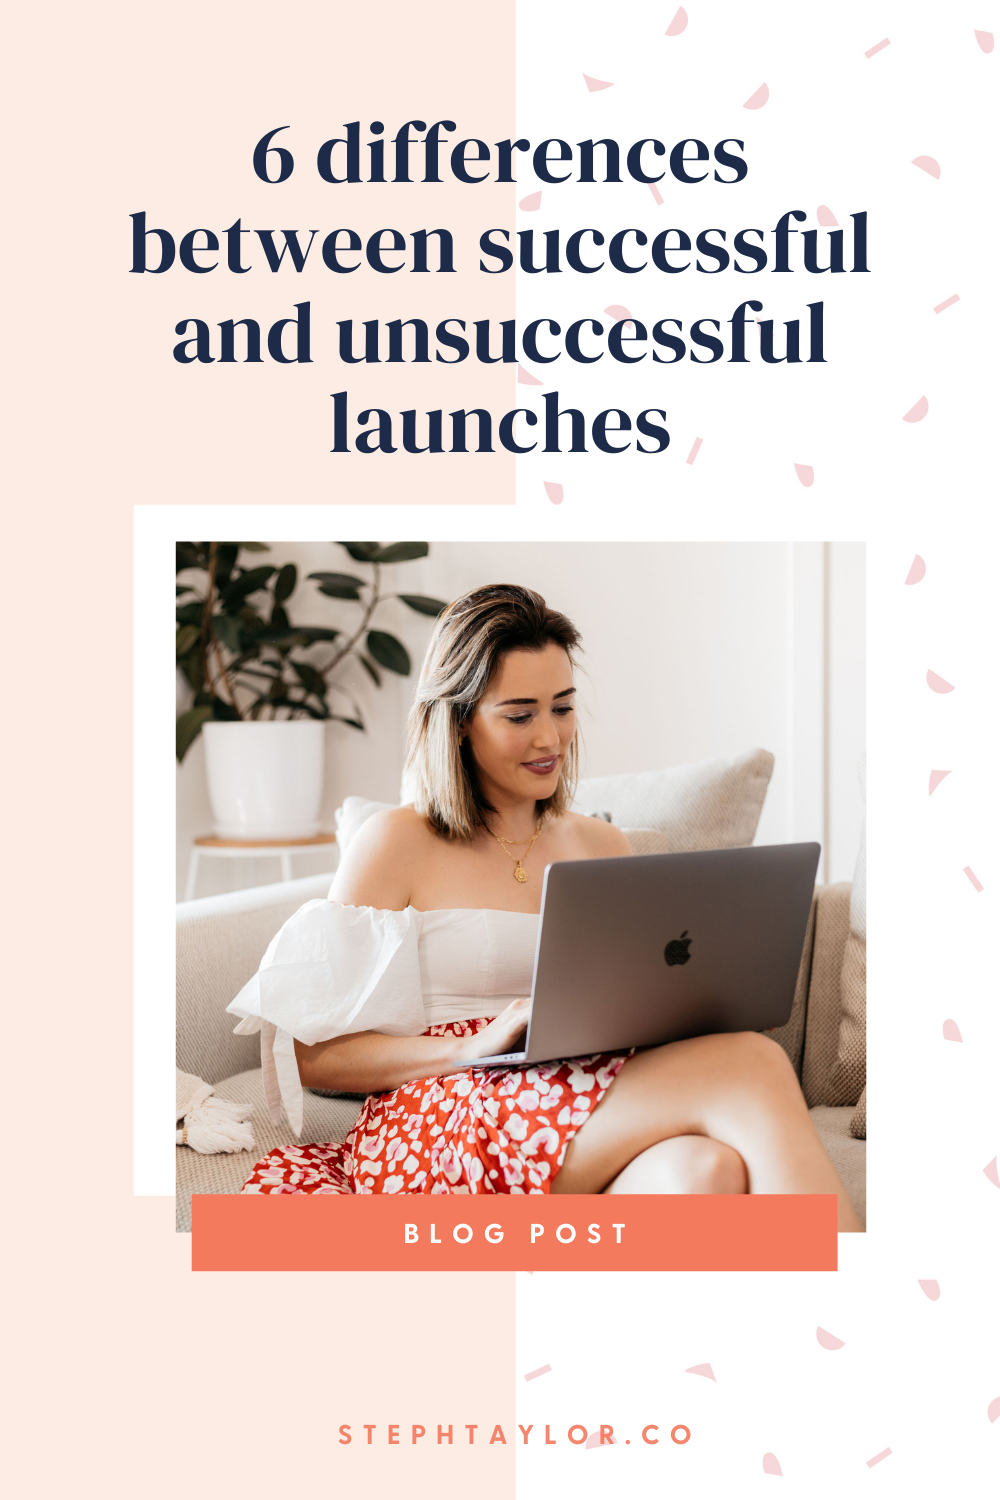 6 differences between successful and unsuccessful launches